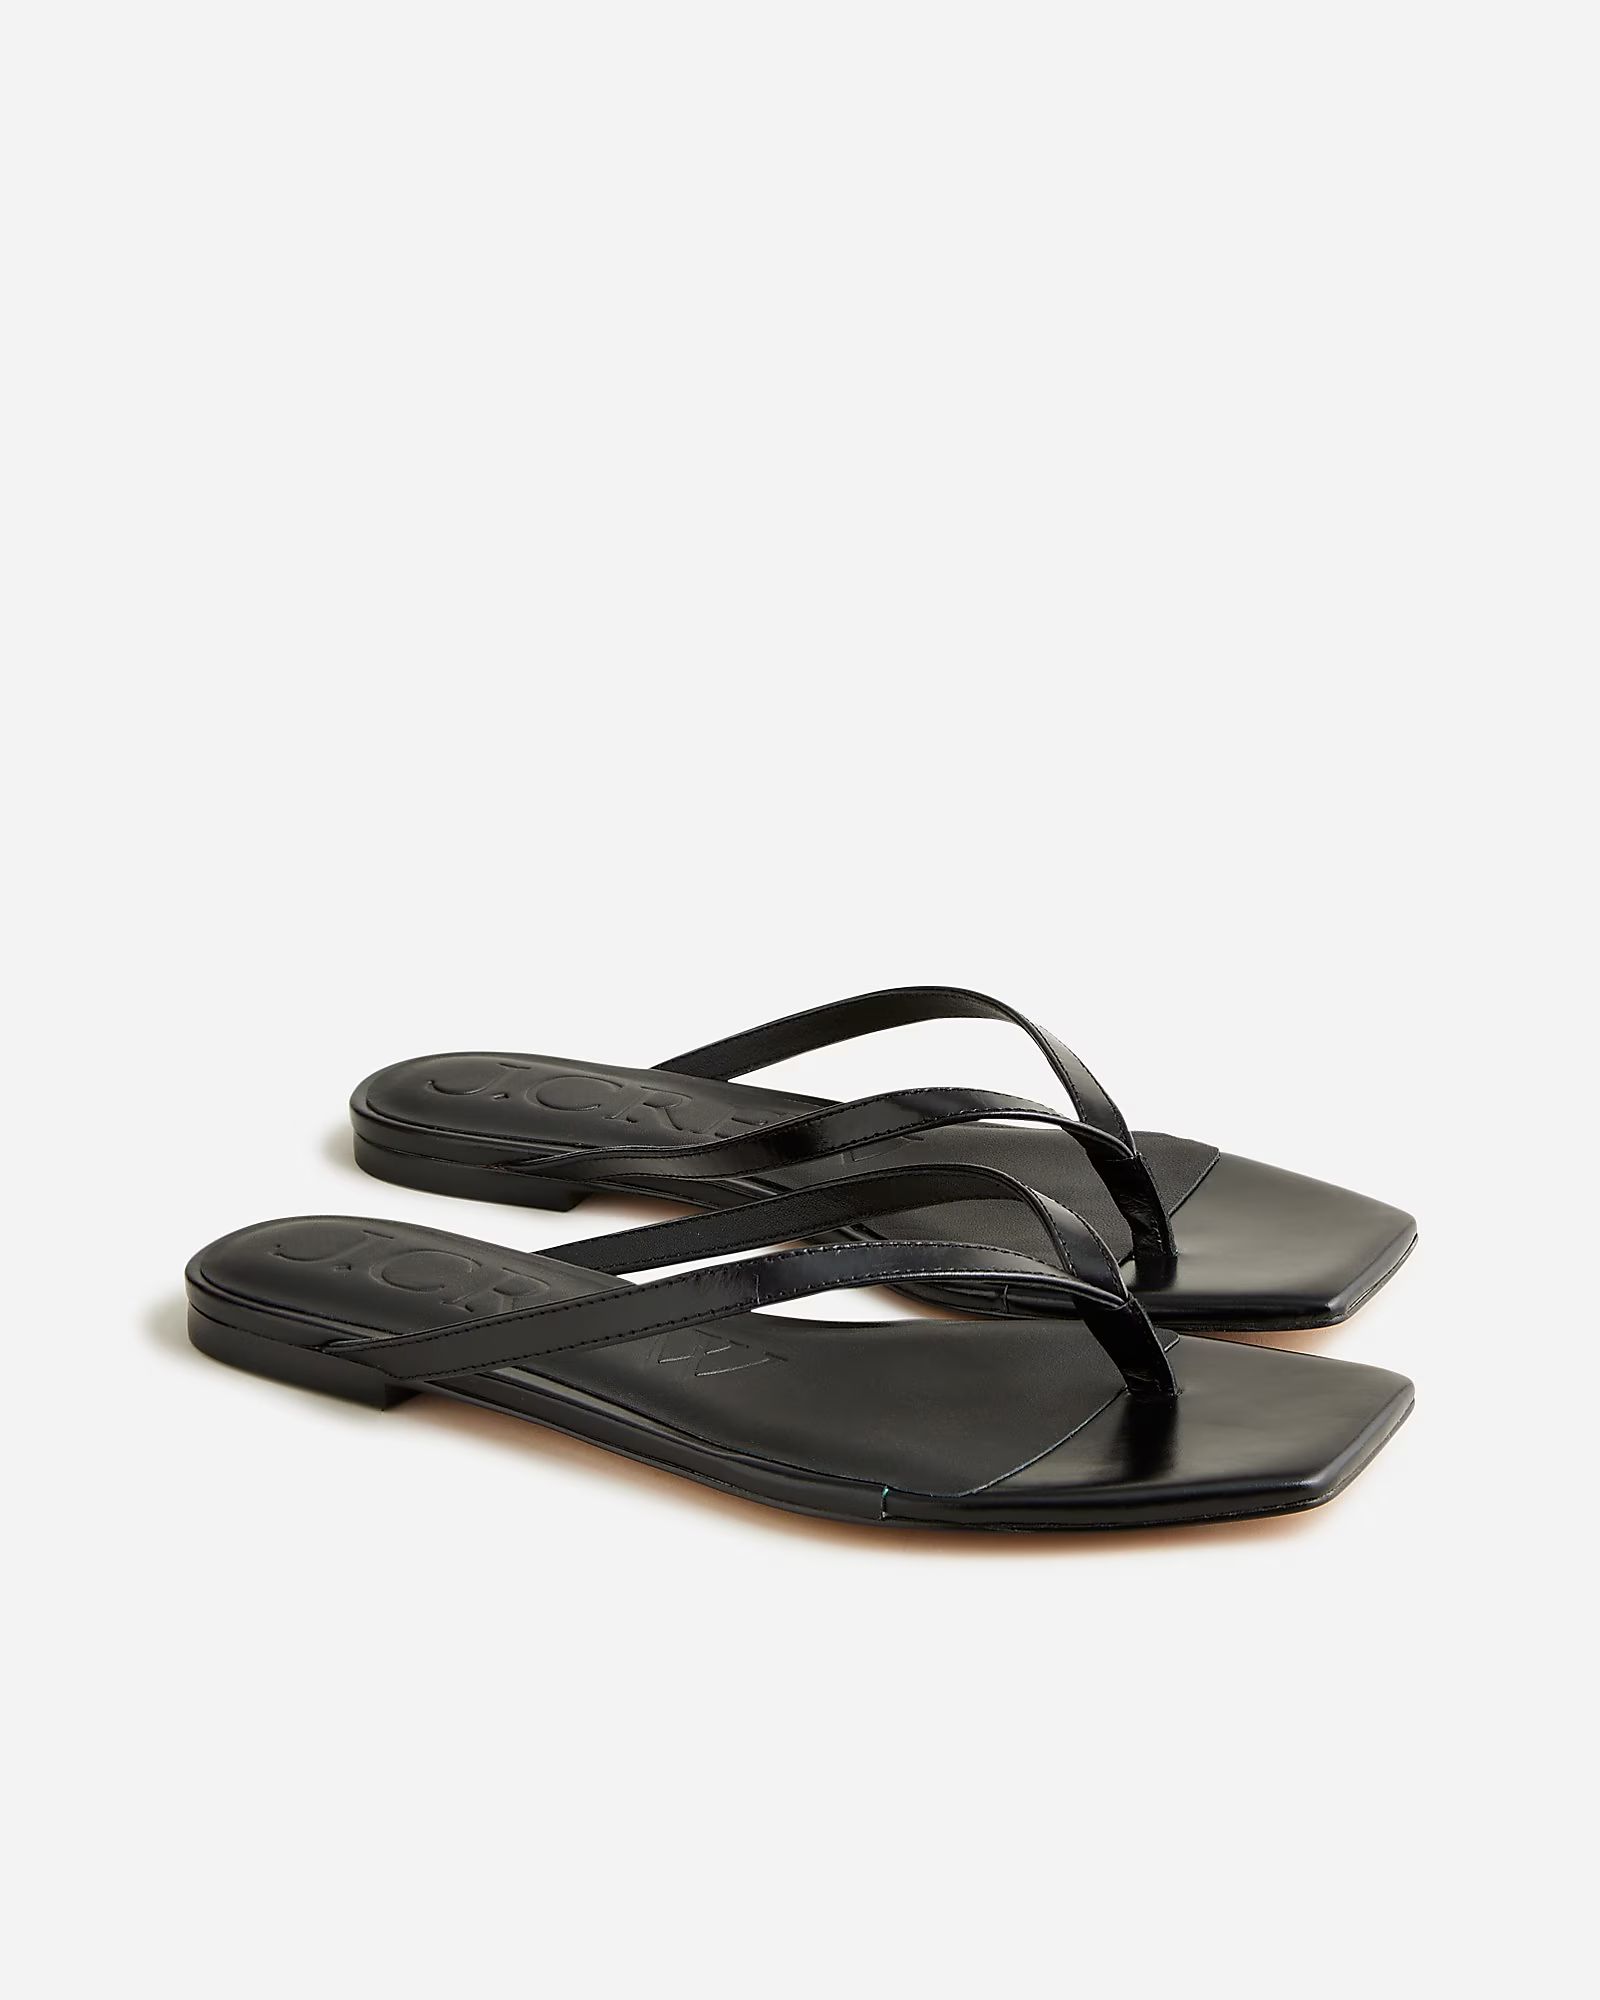 J.Crew: New Capri Thong Sandals In Leather For Women | J.Crew US